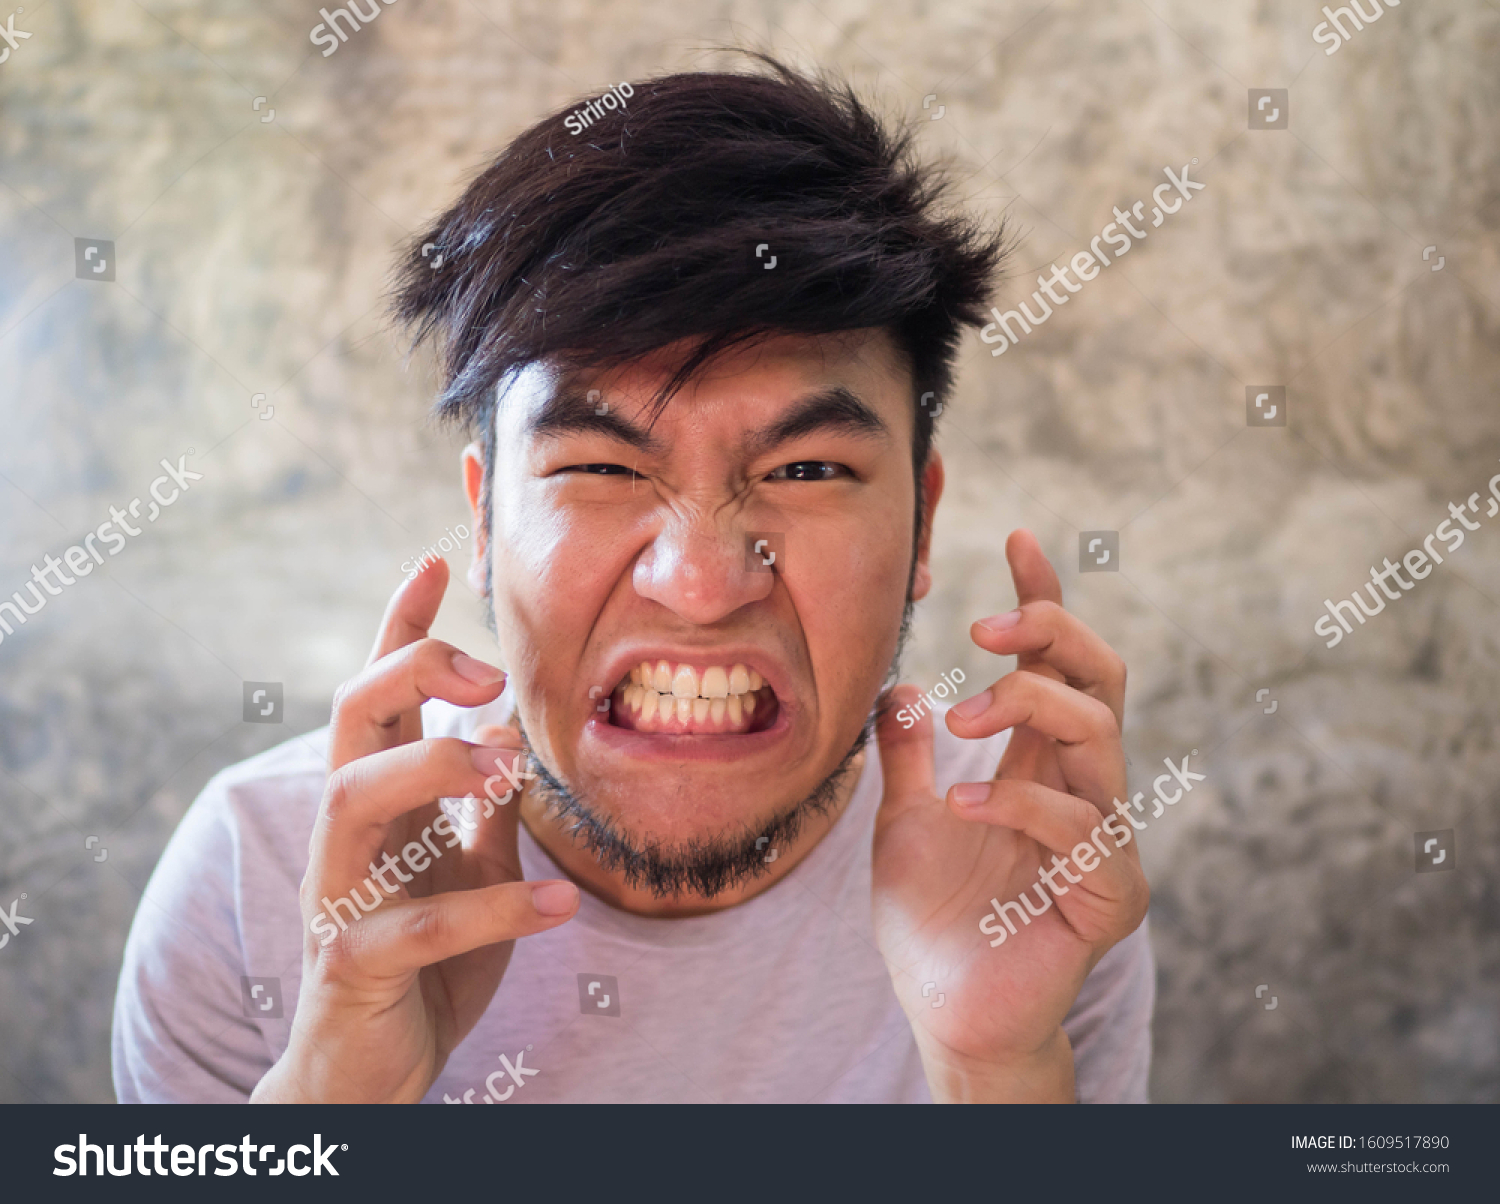 Asian man with a beard wearing a white T-shirt Expressing anger, resentment, anger, and anger, and able to destroy everything that is close to him In a cement backdrop There is space for copy space. #1609517890